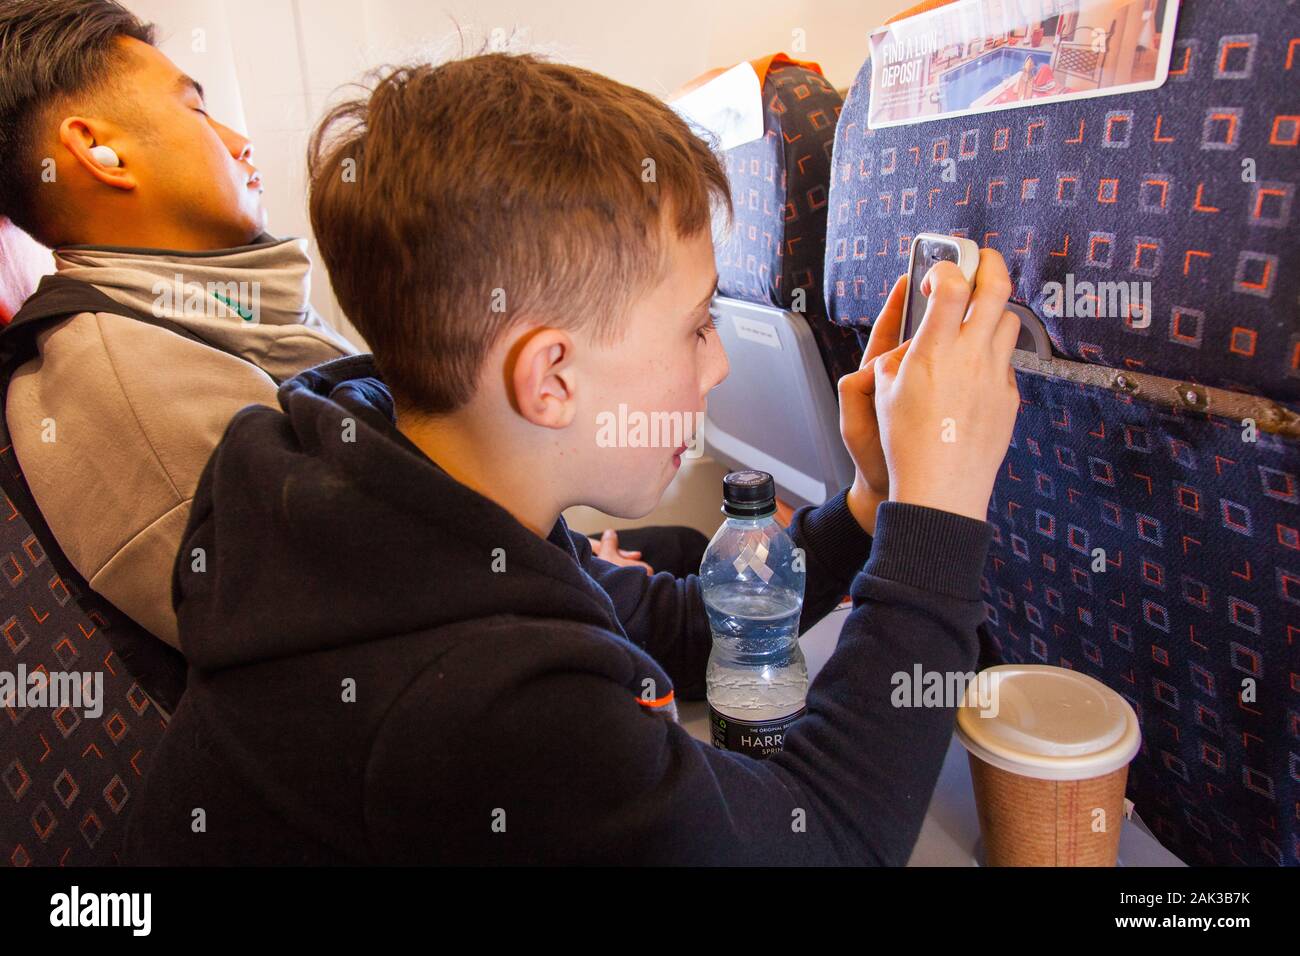 Ten year old boy on his phone, on a easyJet flight to Vienna, London Gatwick Airport, United Kingdom. Stock Photo